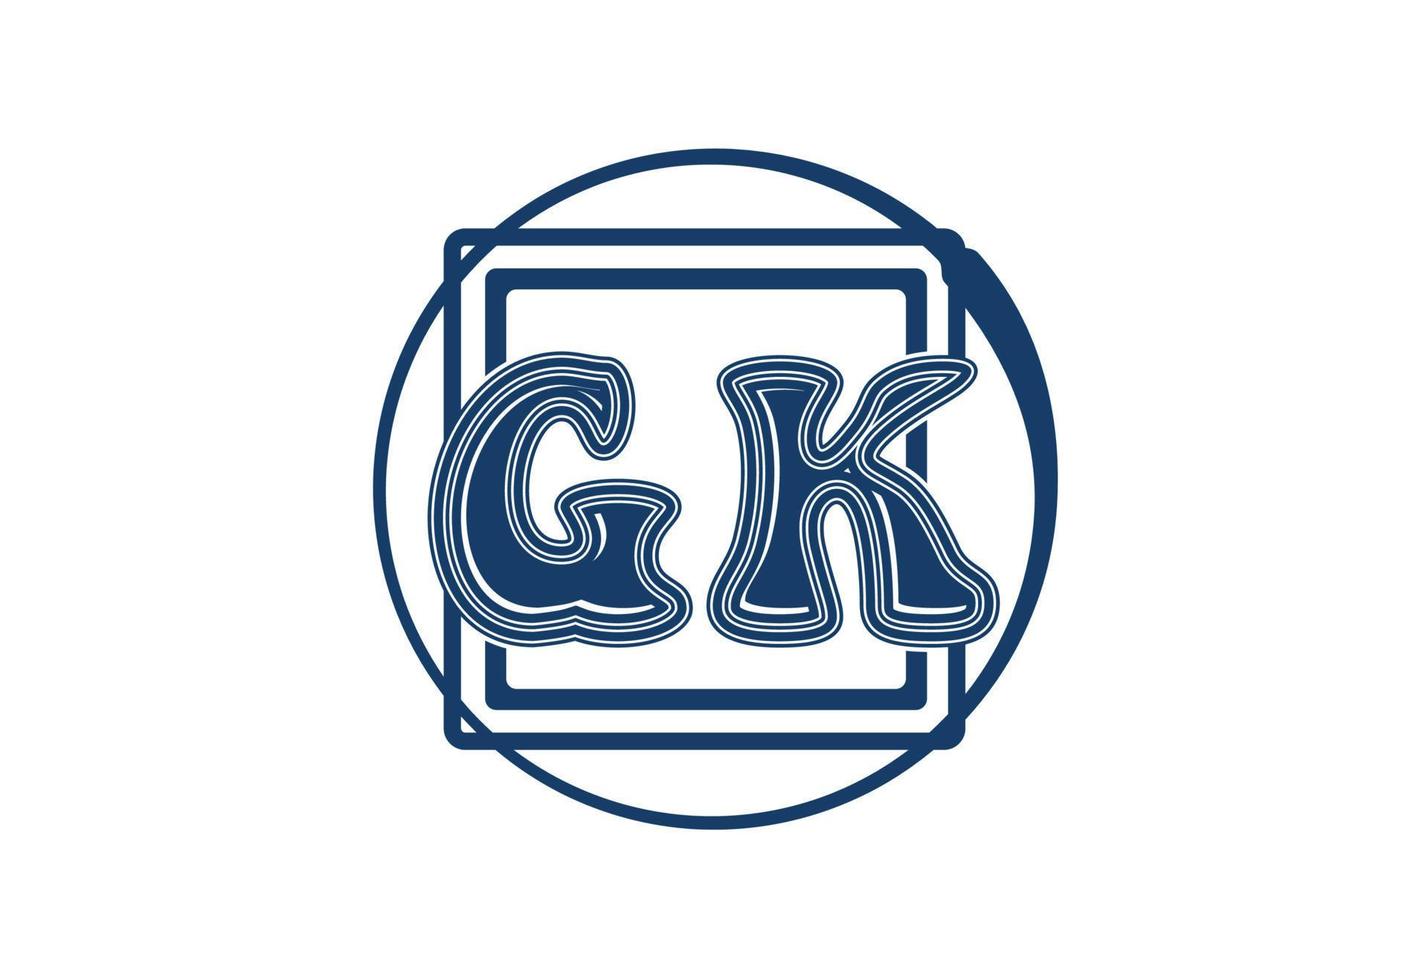 GK letter logo and icon design template vector